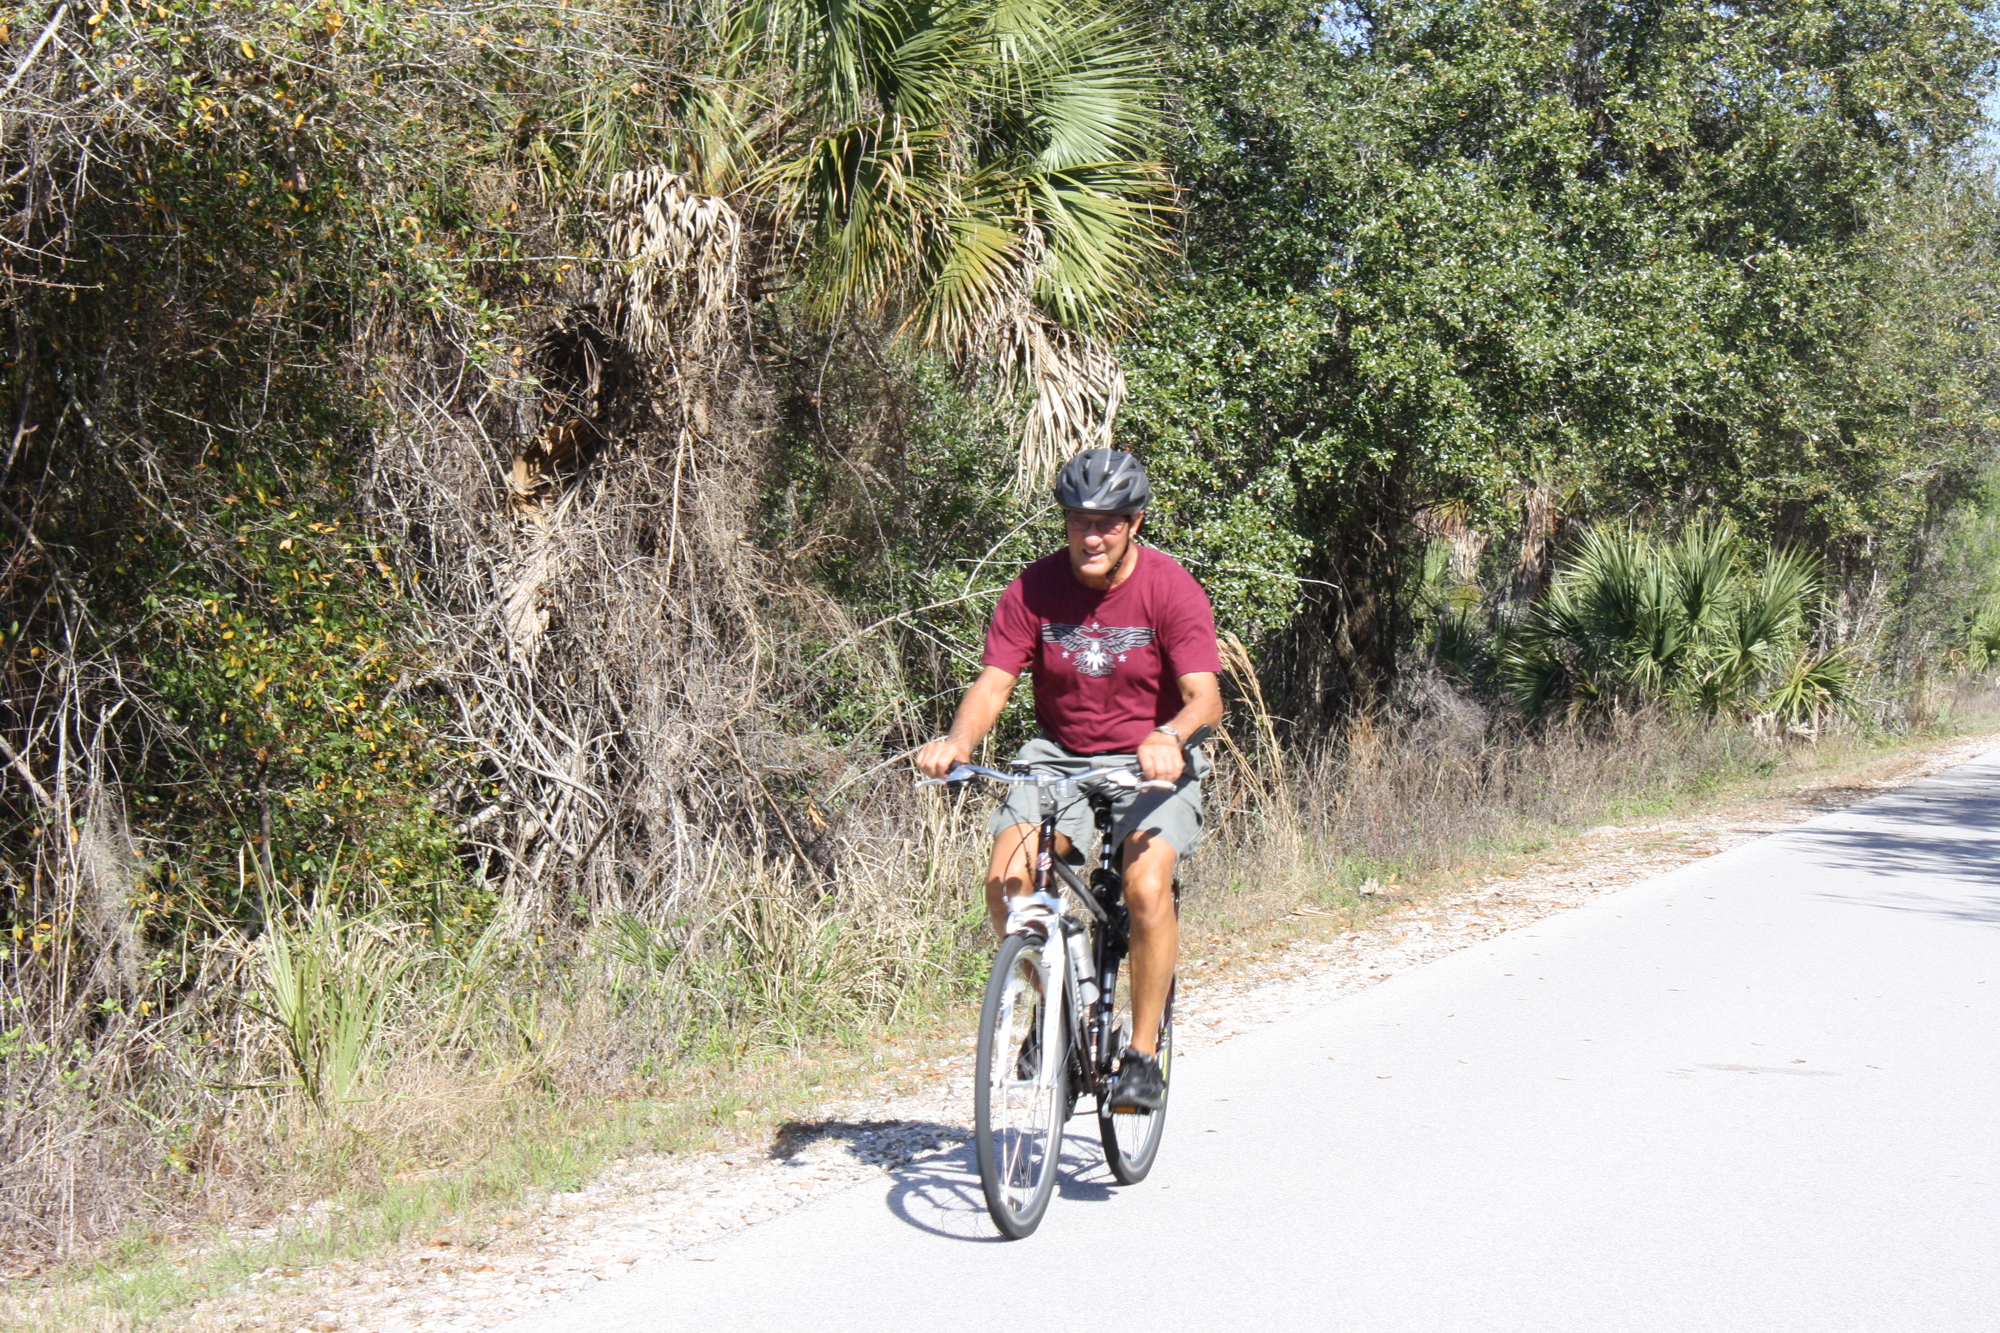 The city said an expanded trail network is a top priority for the public and could help make people feel more comfortable biking around Sarasota.